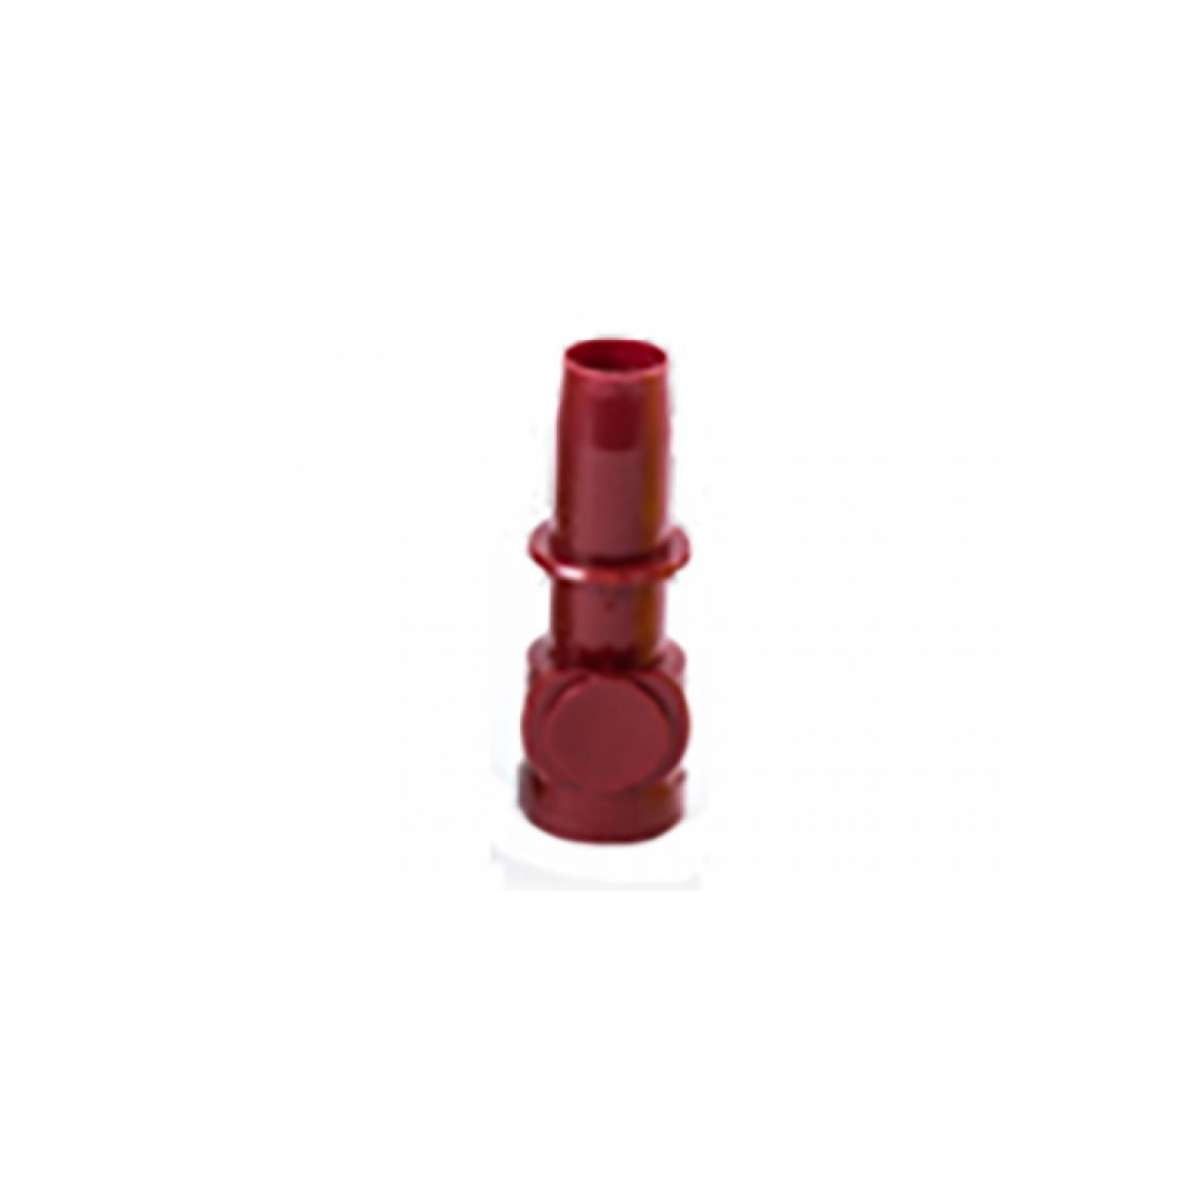 IsoLink 5" Rigid Spout with 1" Tip - Red